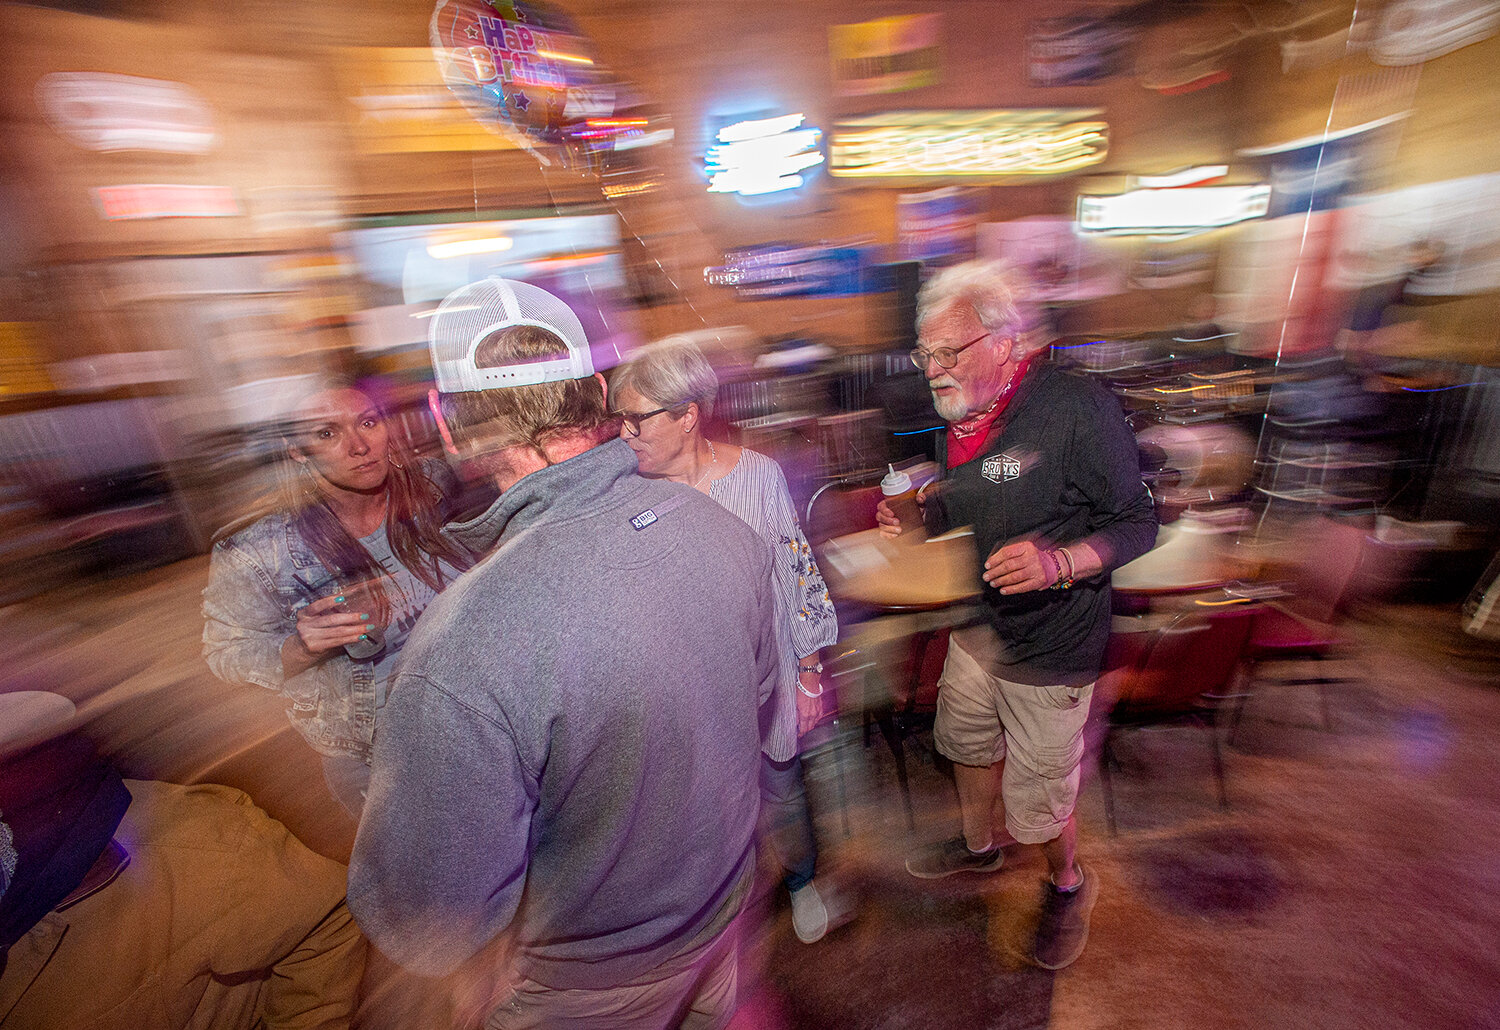 James Brock, right, is on constant motion at Brock’s Food and Drink. This tavern owner has built a place known for his barbecue and hospitality.